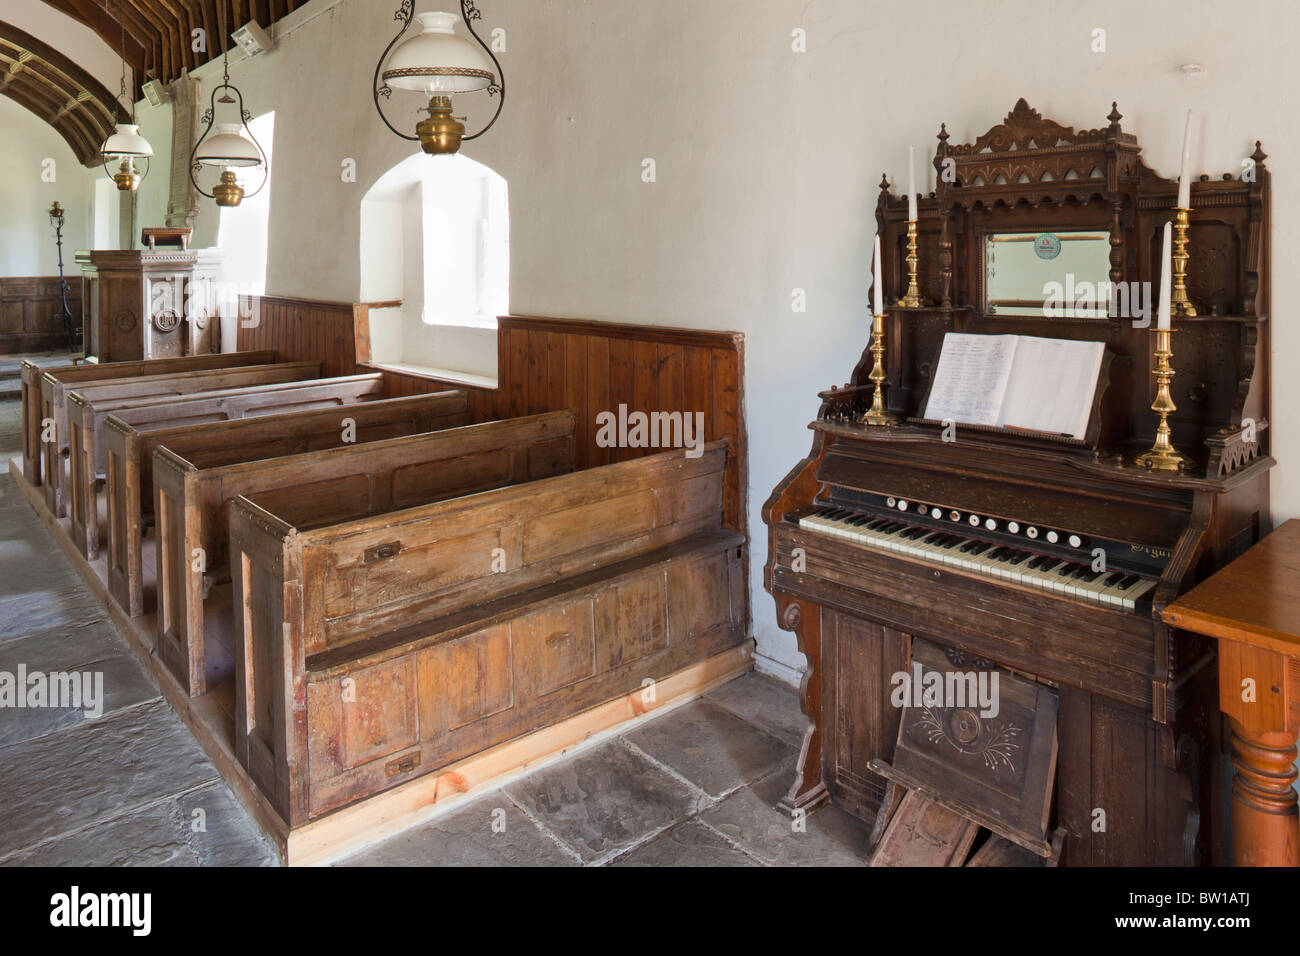 A harmonium, or American Organ, in the simple, unspoilt, interior of 14th century St Marys church, Llanywern, Powys, Wales Stock Photo